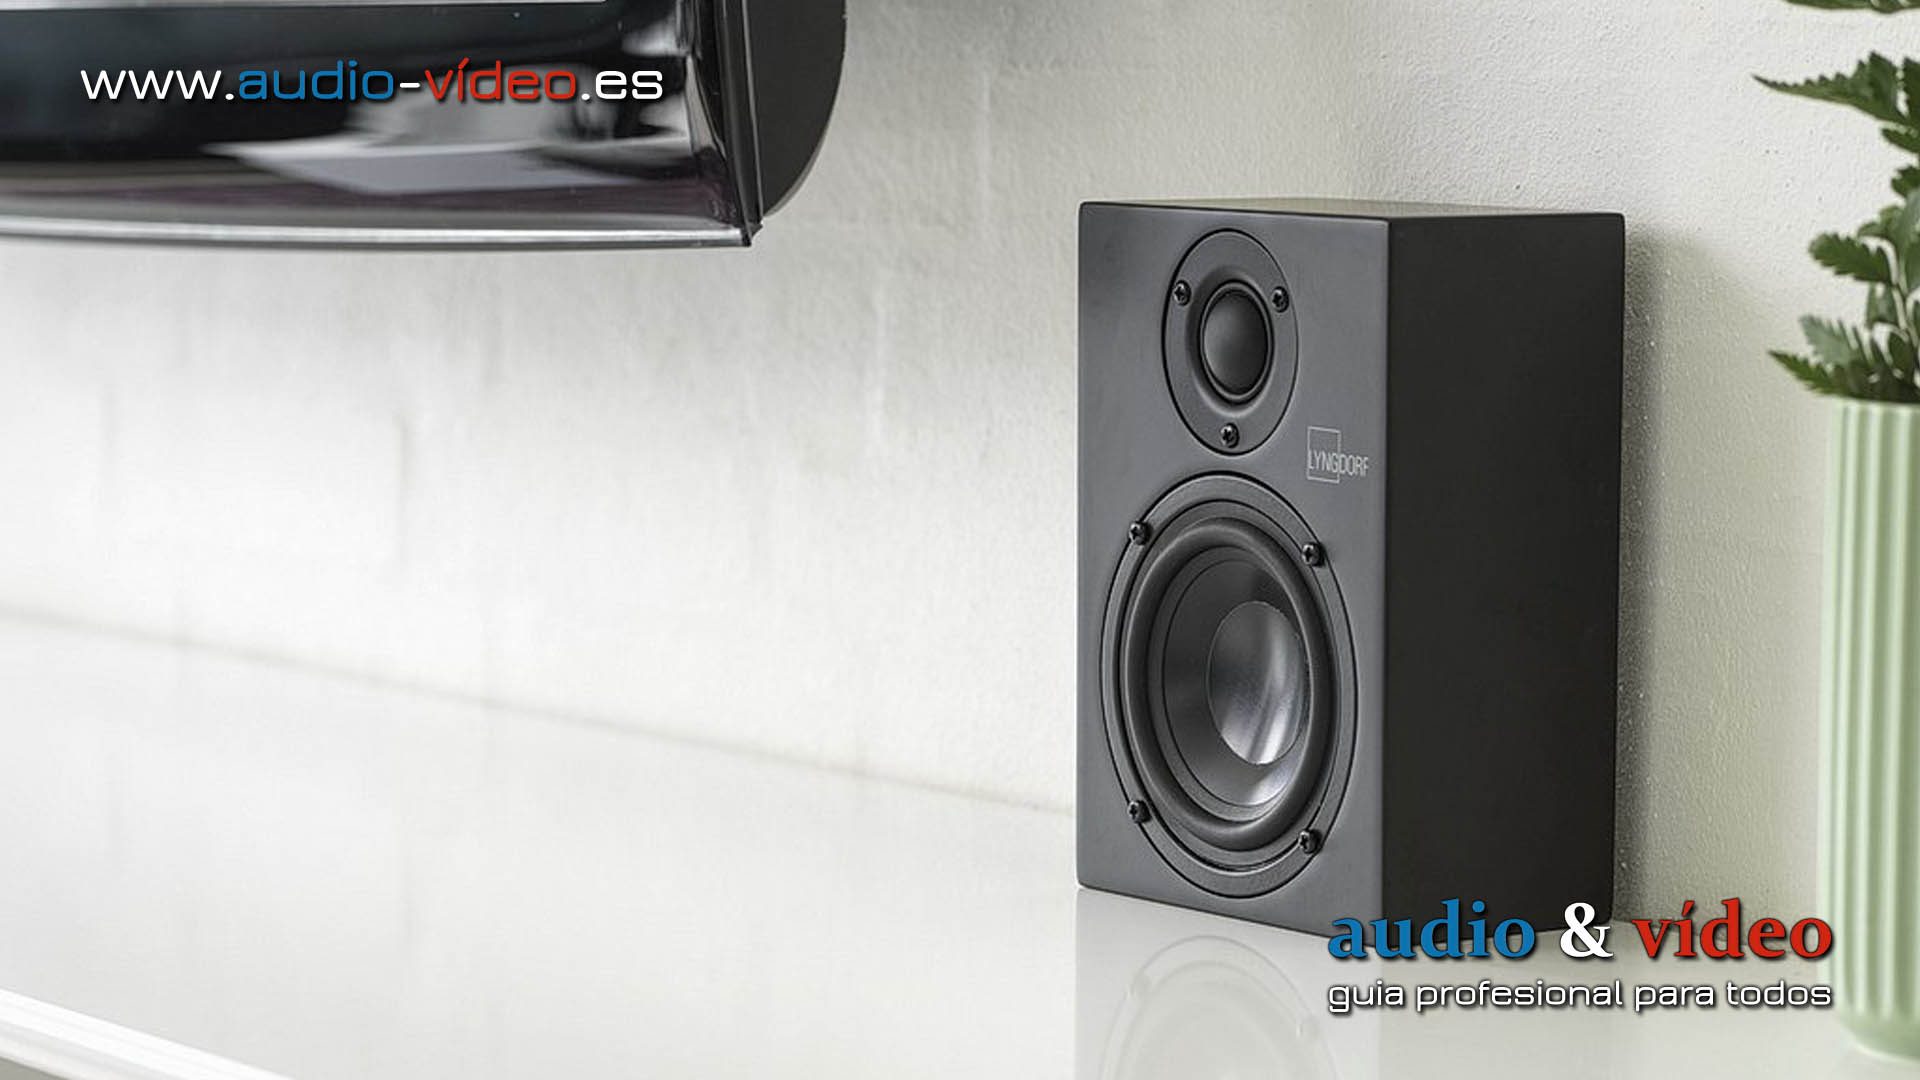 Altavoces Lyngdorf MH-3 y subwoofer activo BW-3